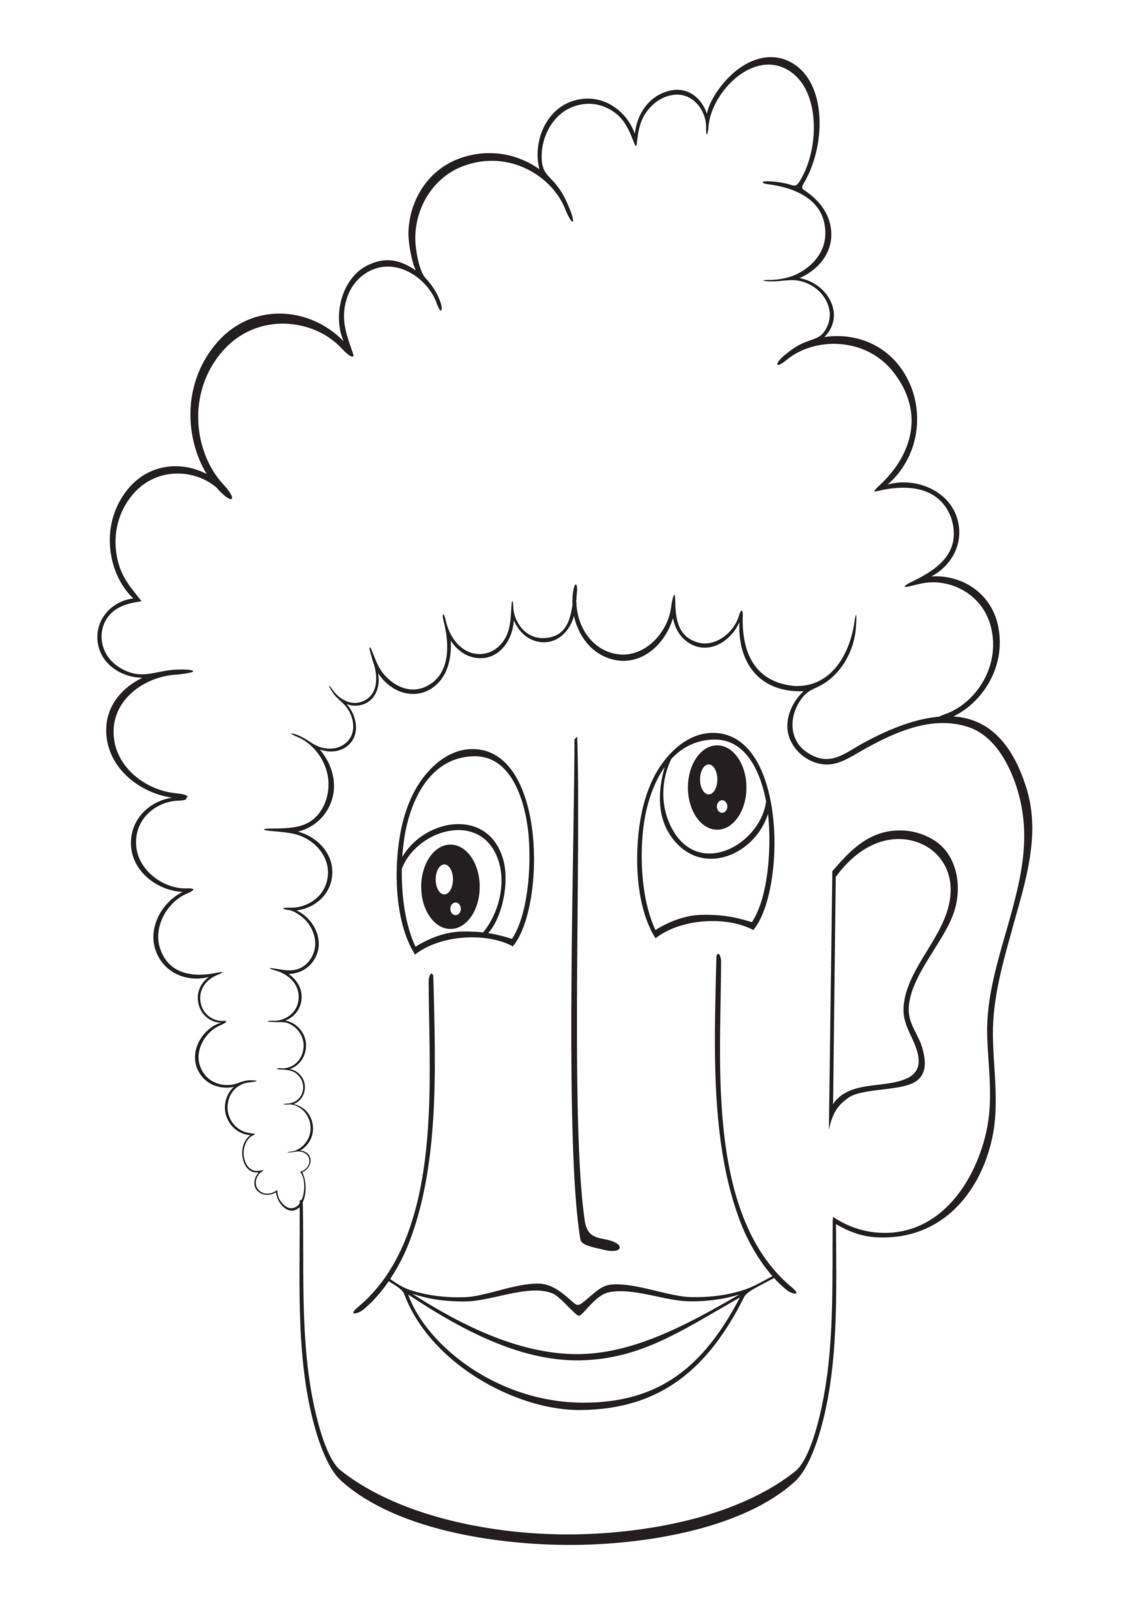 Illustration of cheerful mug of beer with froth